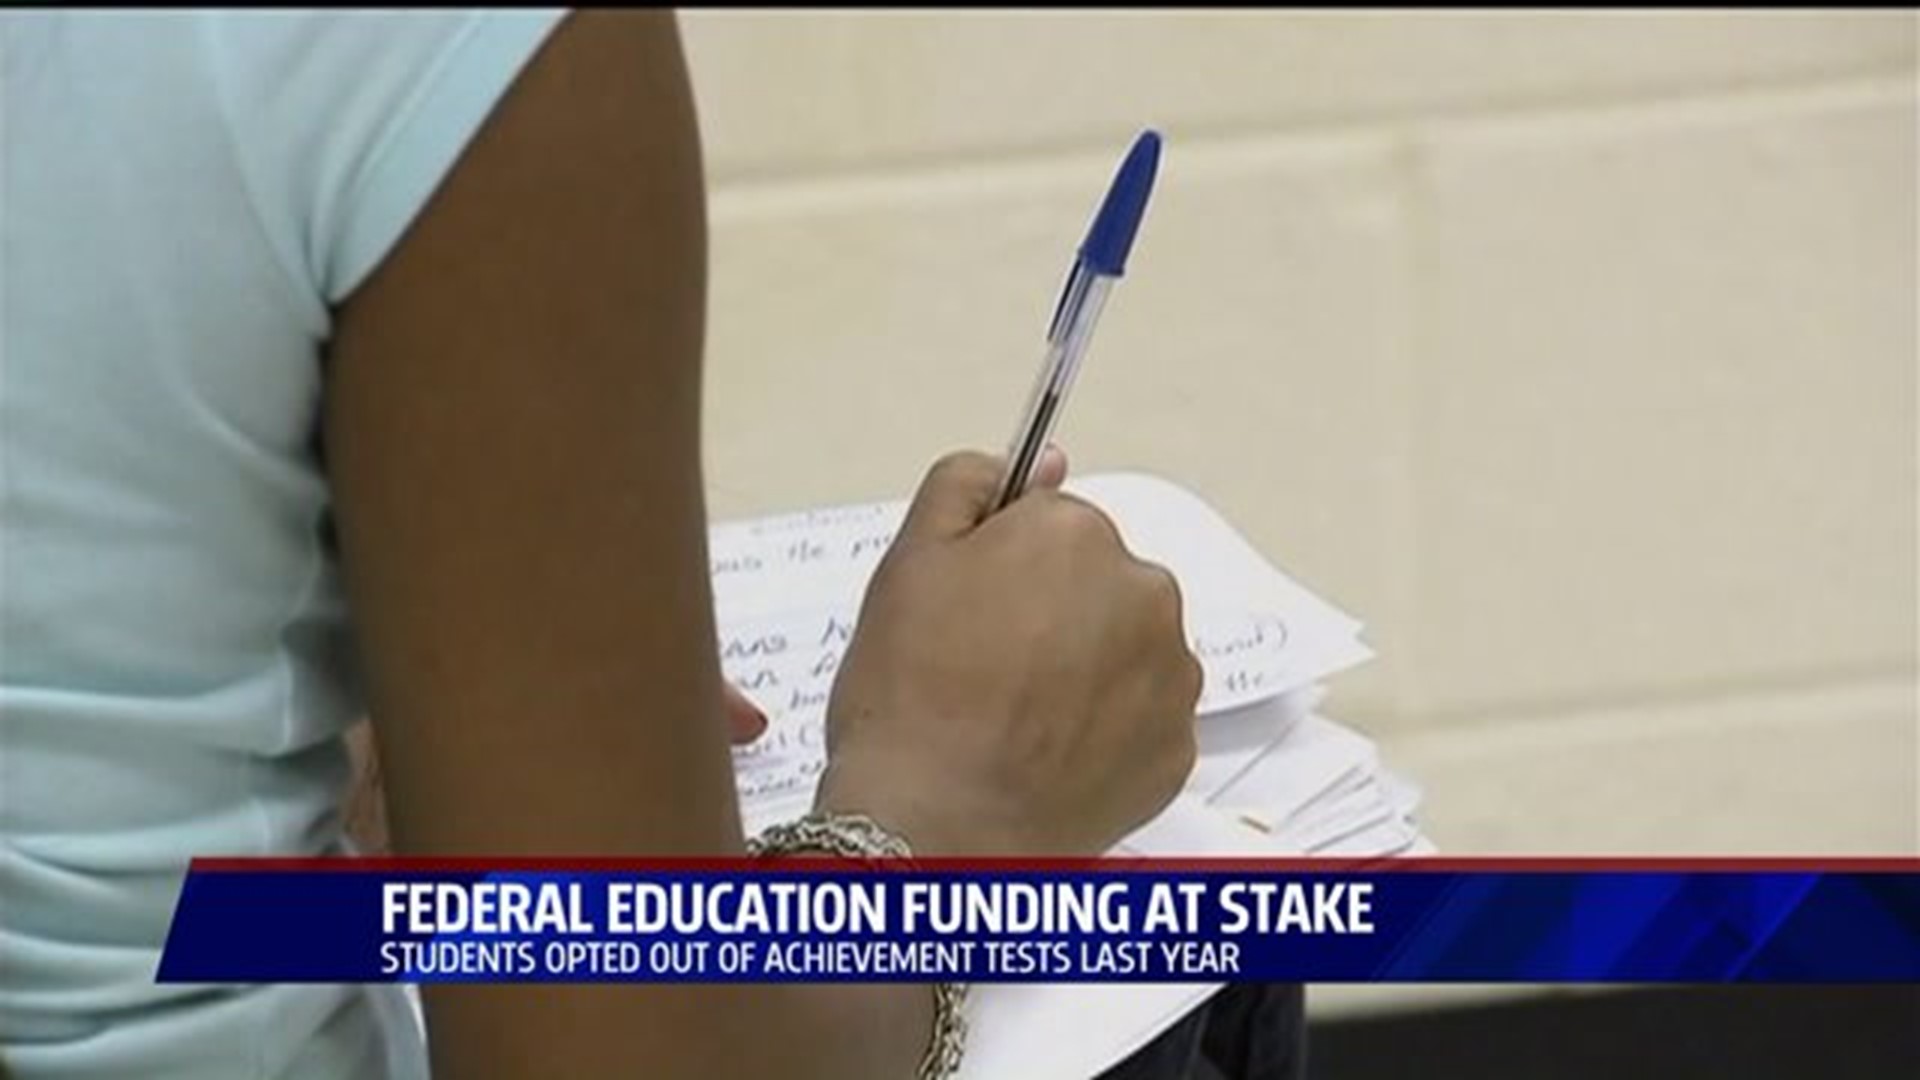 Fed funding for education at stake